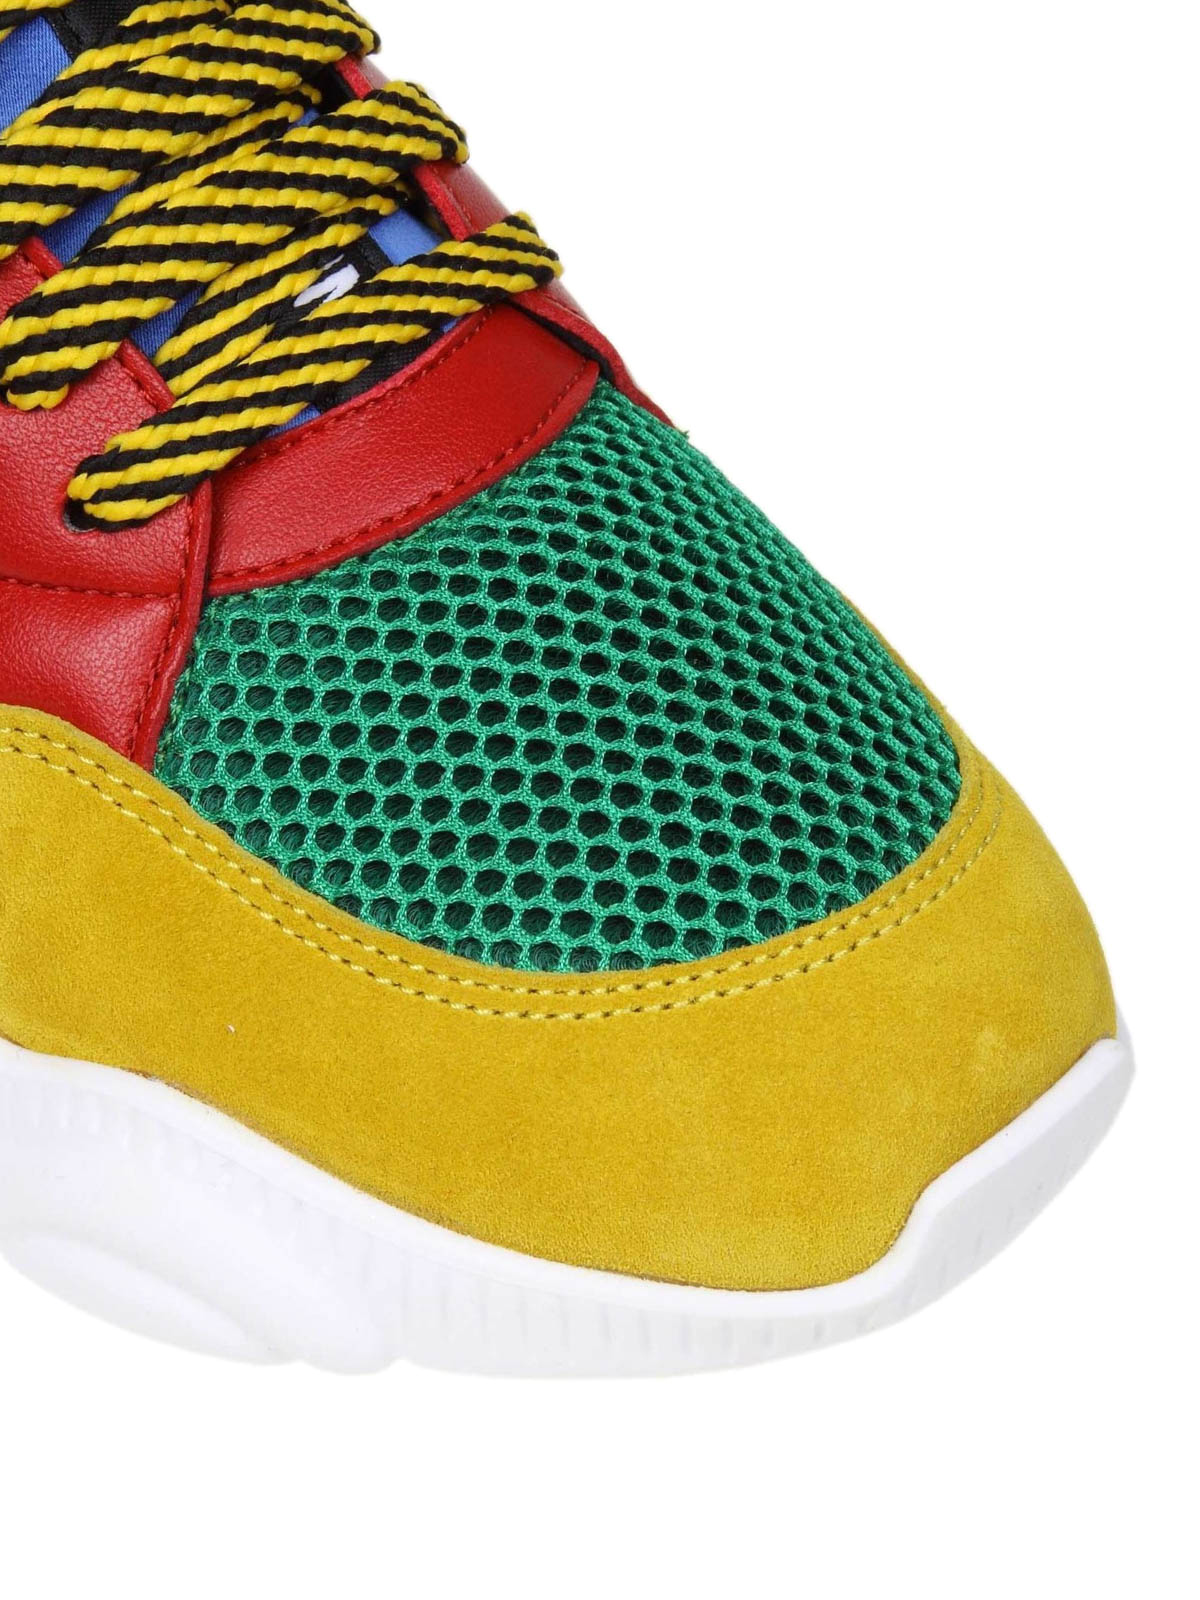 Moschino Teddy Bear sole multicolour sneakers trainers